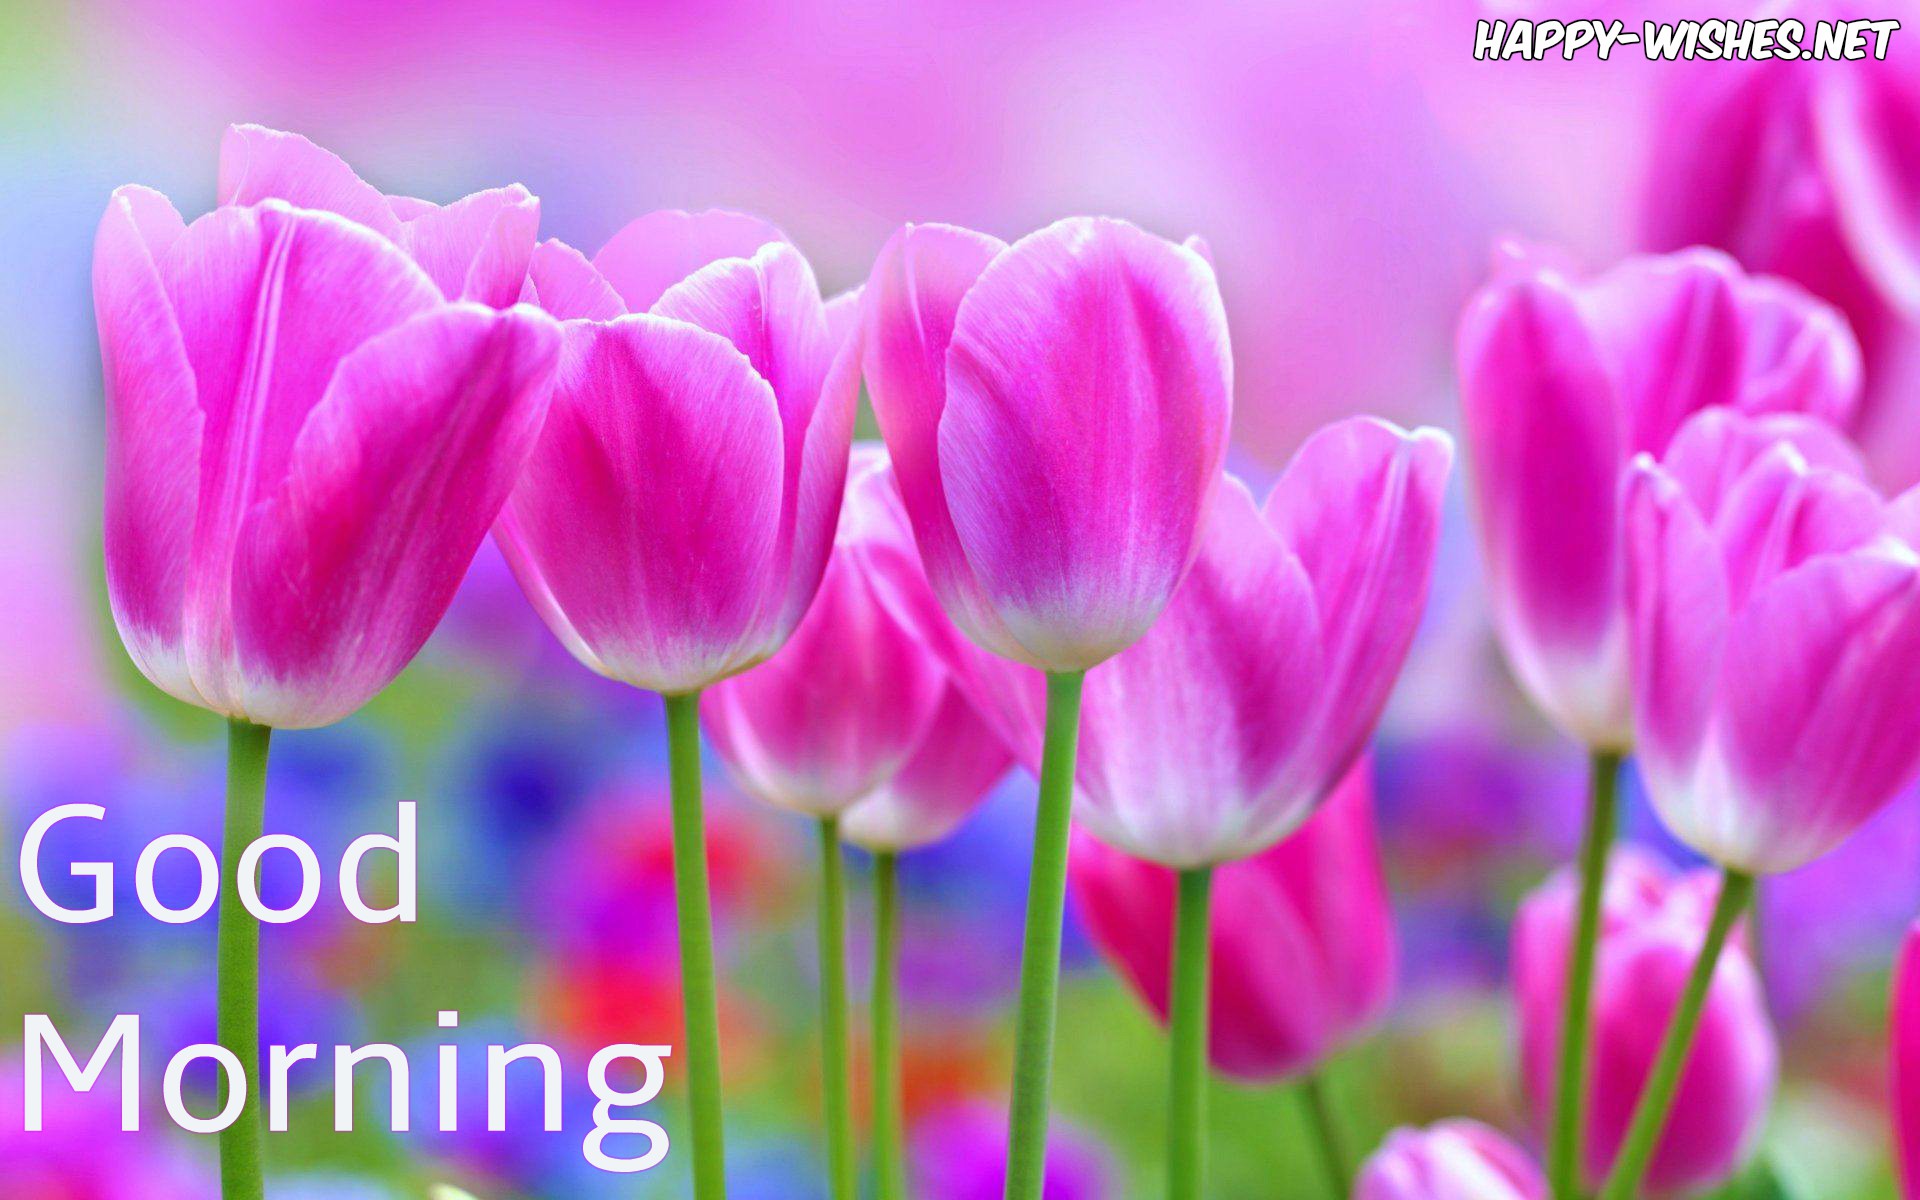 Good Morning Wishes With Flowers Images - Beautiful Wallpaper Flowers -  1920x1200 Wallpaper 